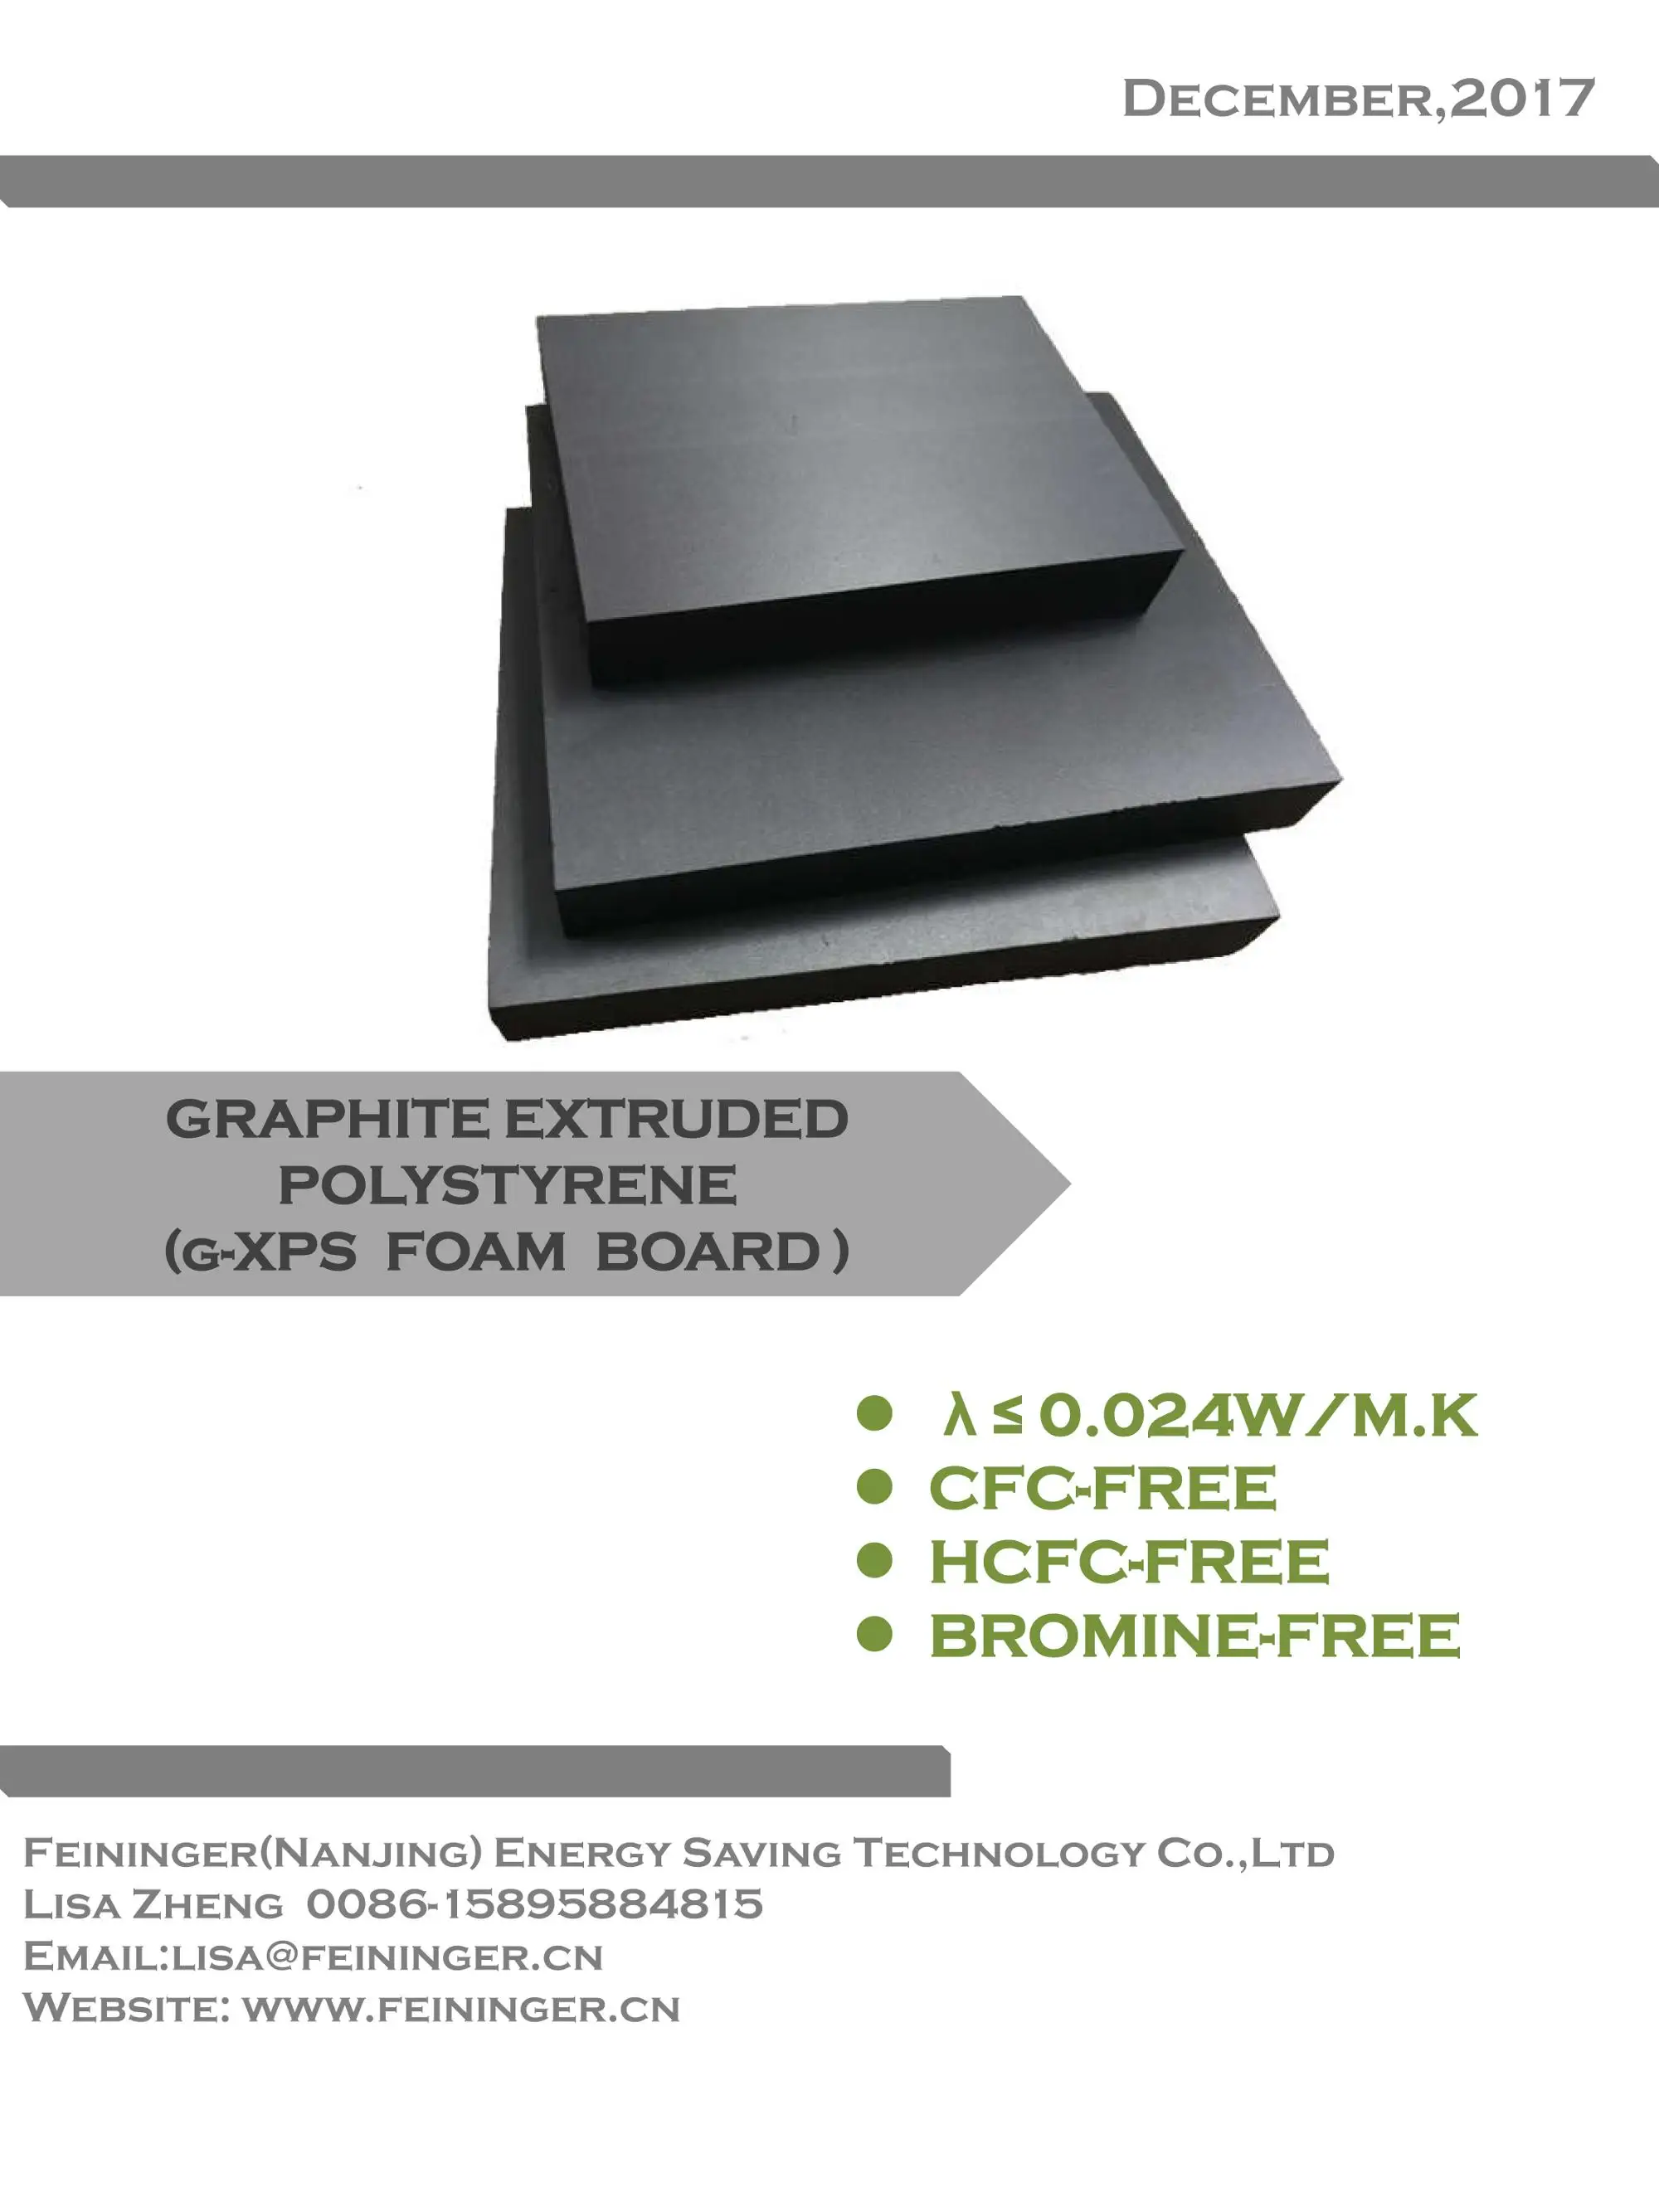 How about XPS foam board prices in market - Feininger